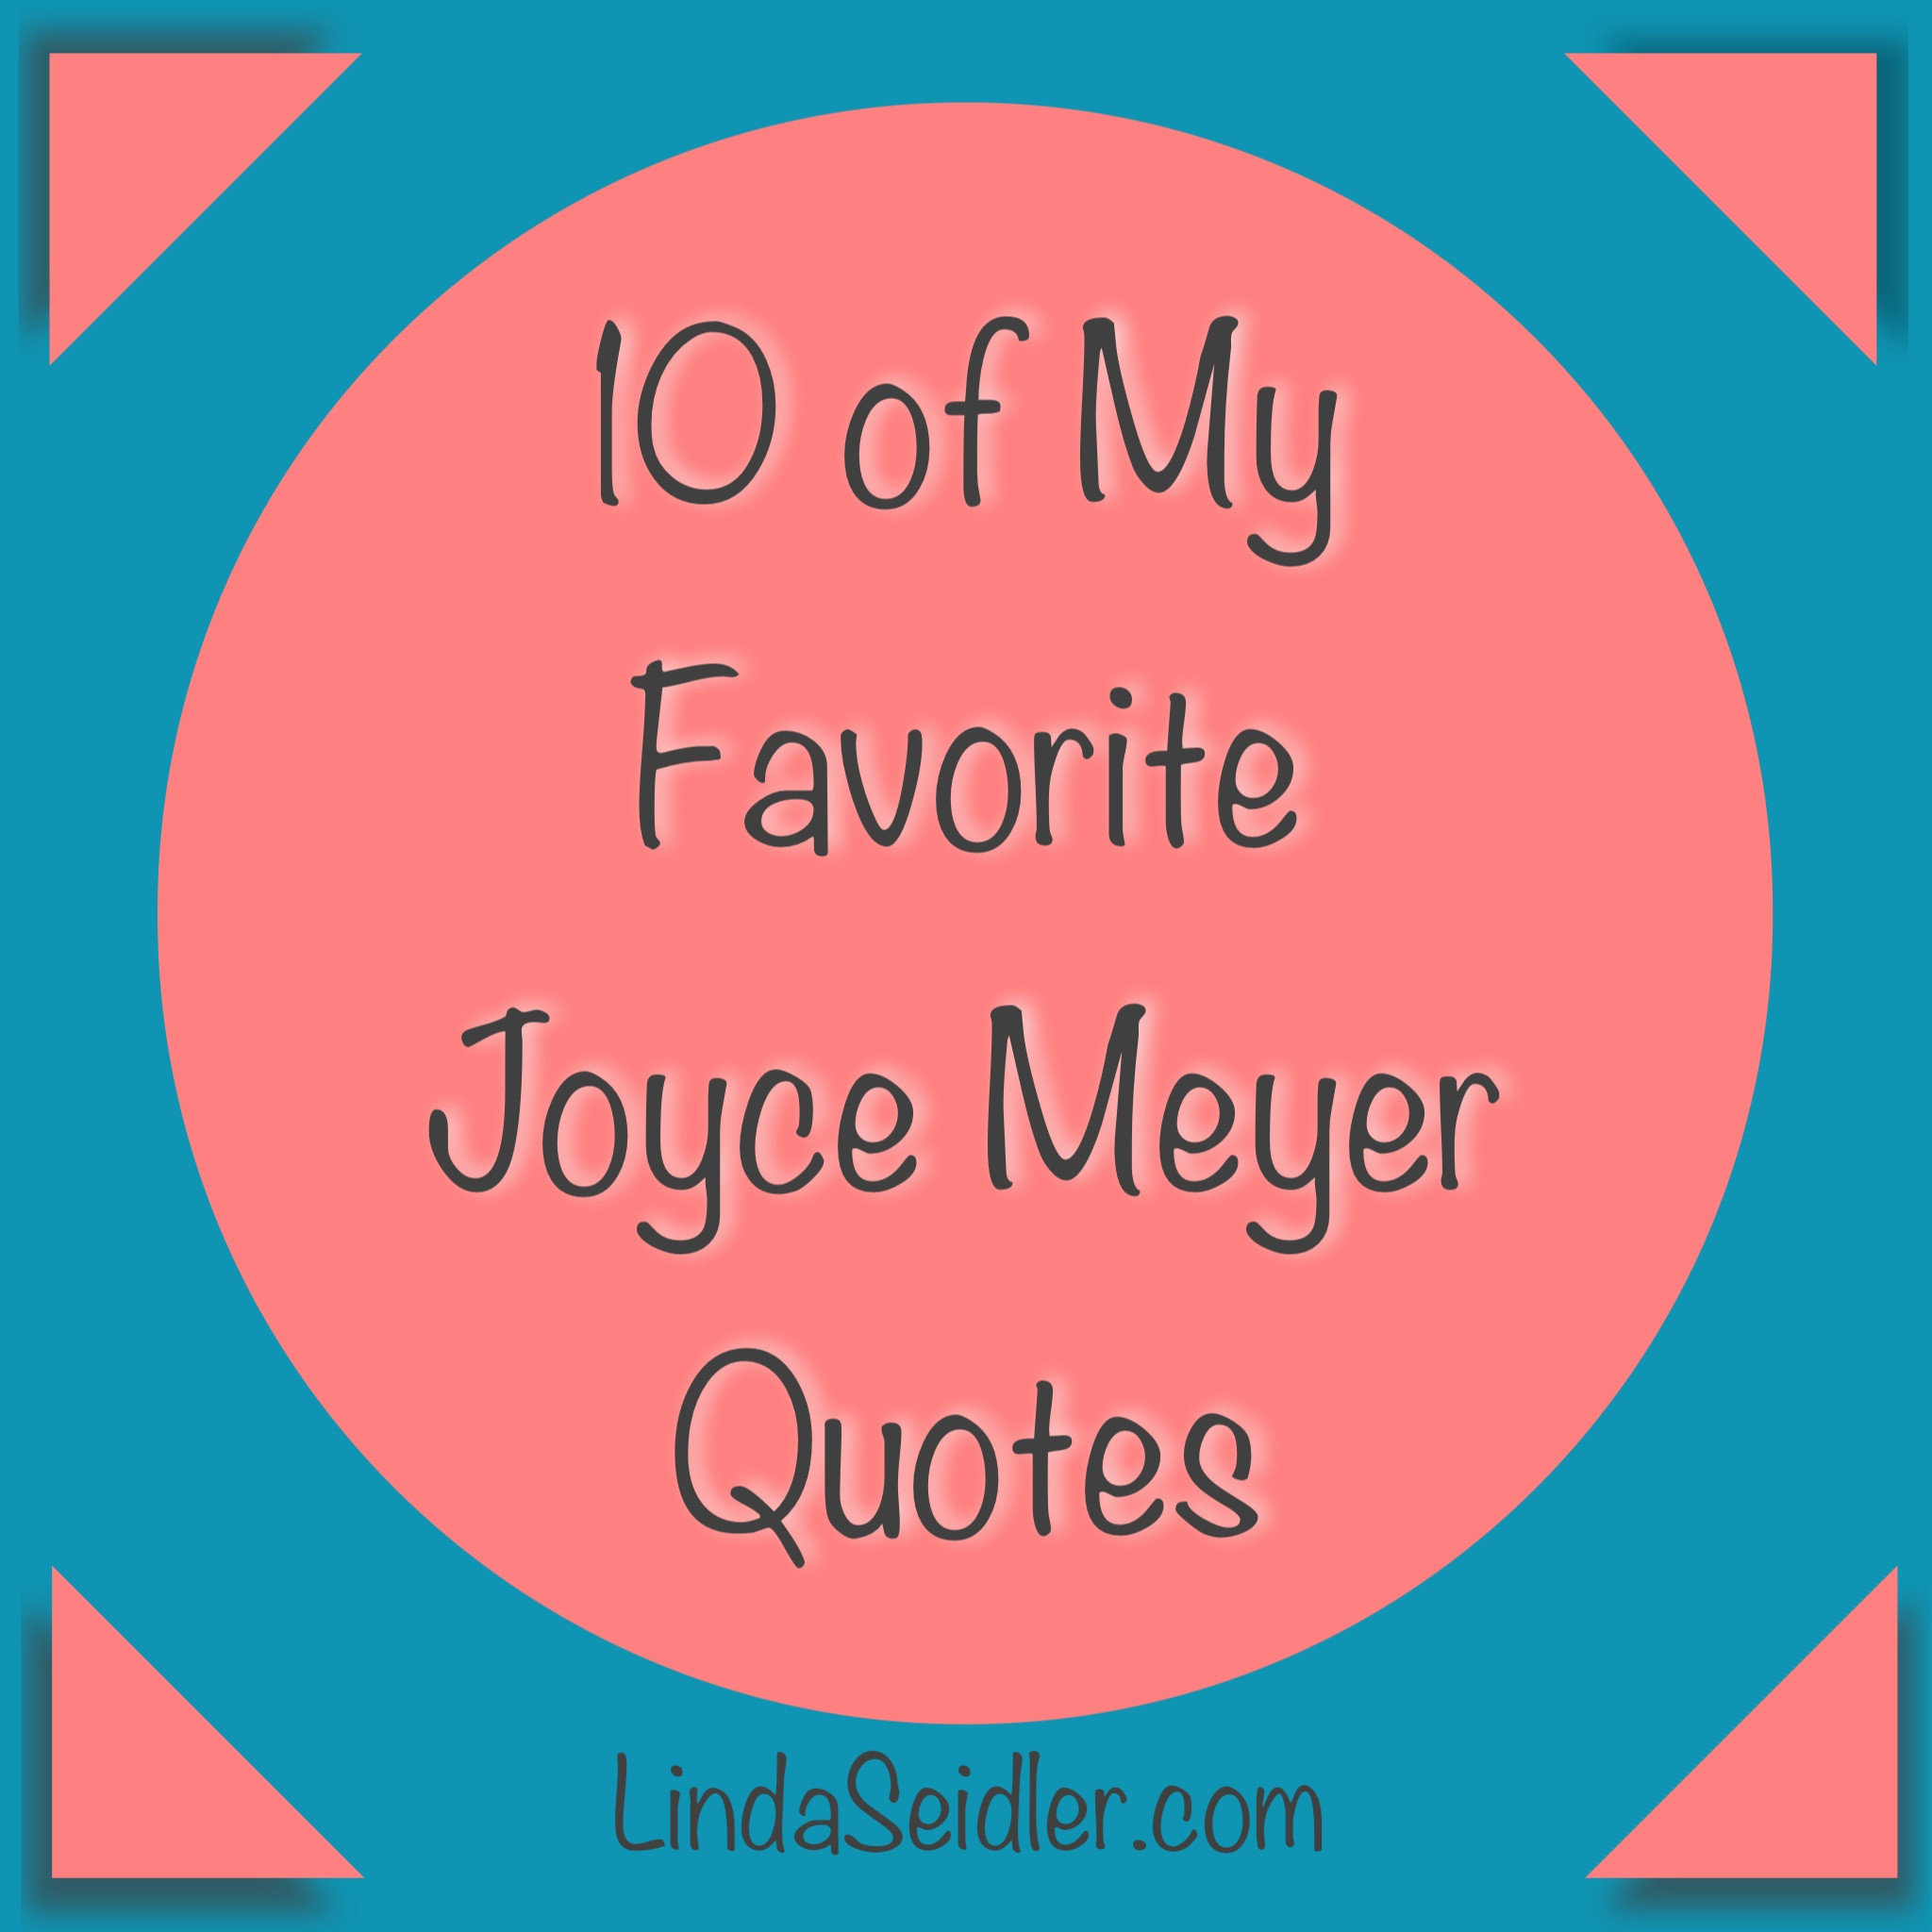 Joyce Meyer Quotes On Relationships
 Joyce Meyer Quotes QuotesGram